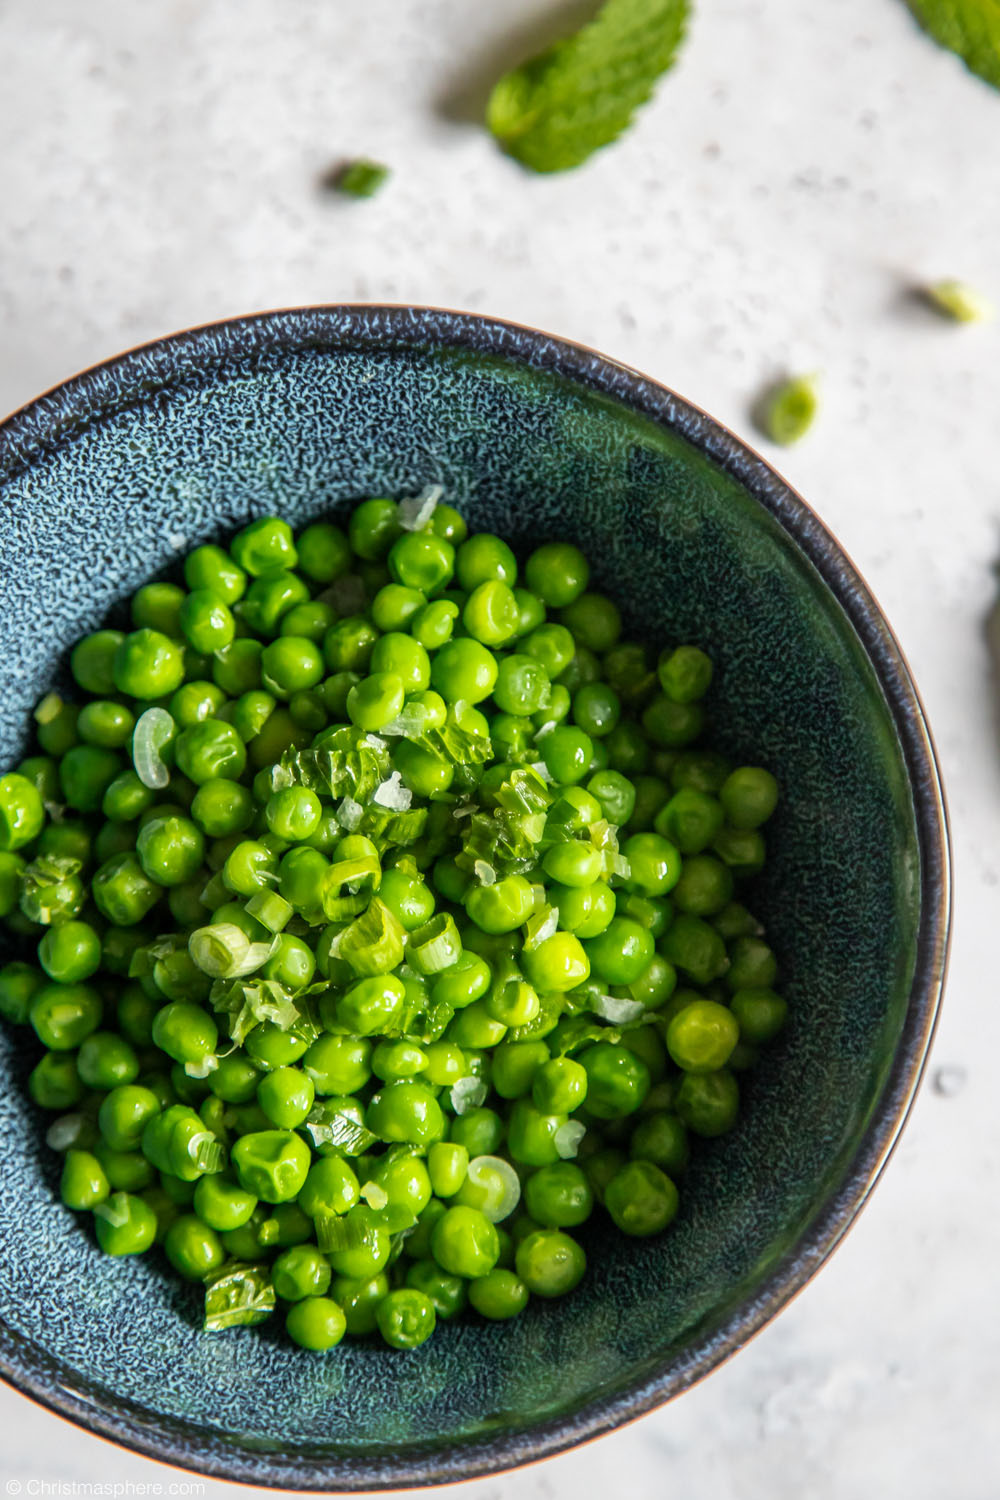 Birds eye view of a blue bowl containing peas with mint and spring onion